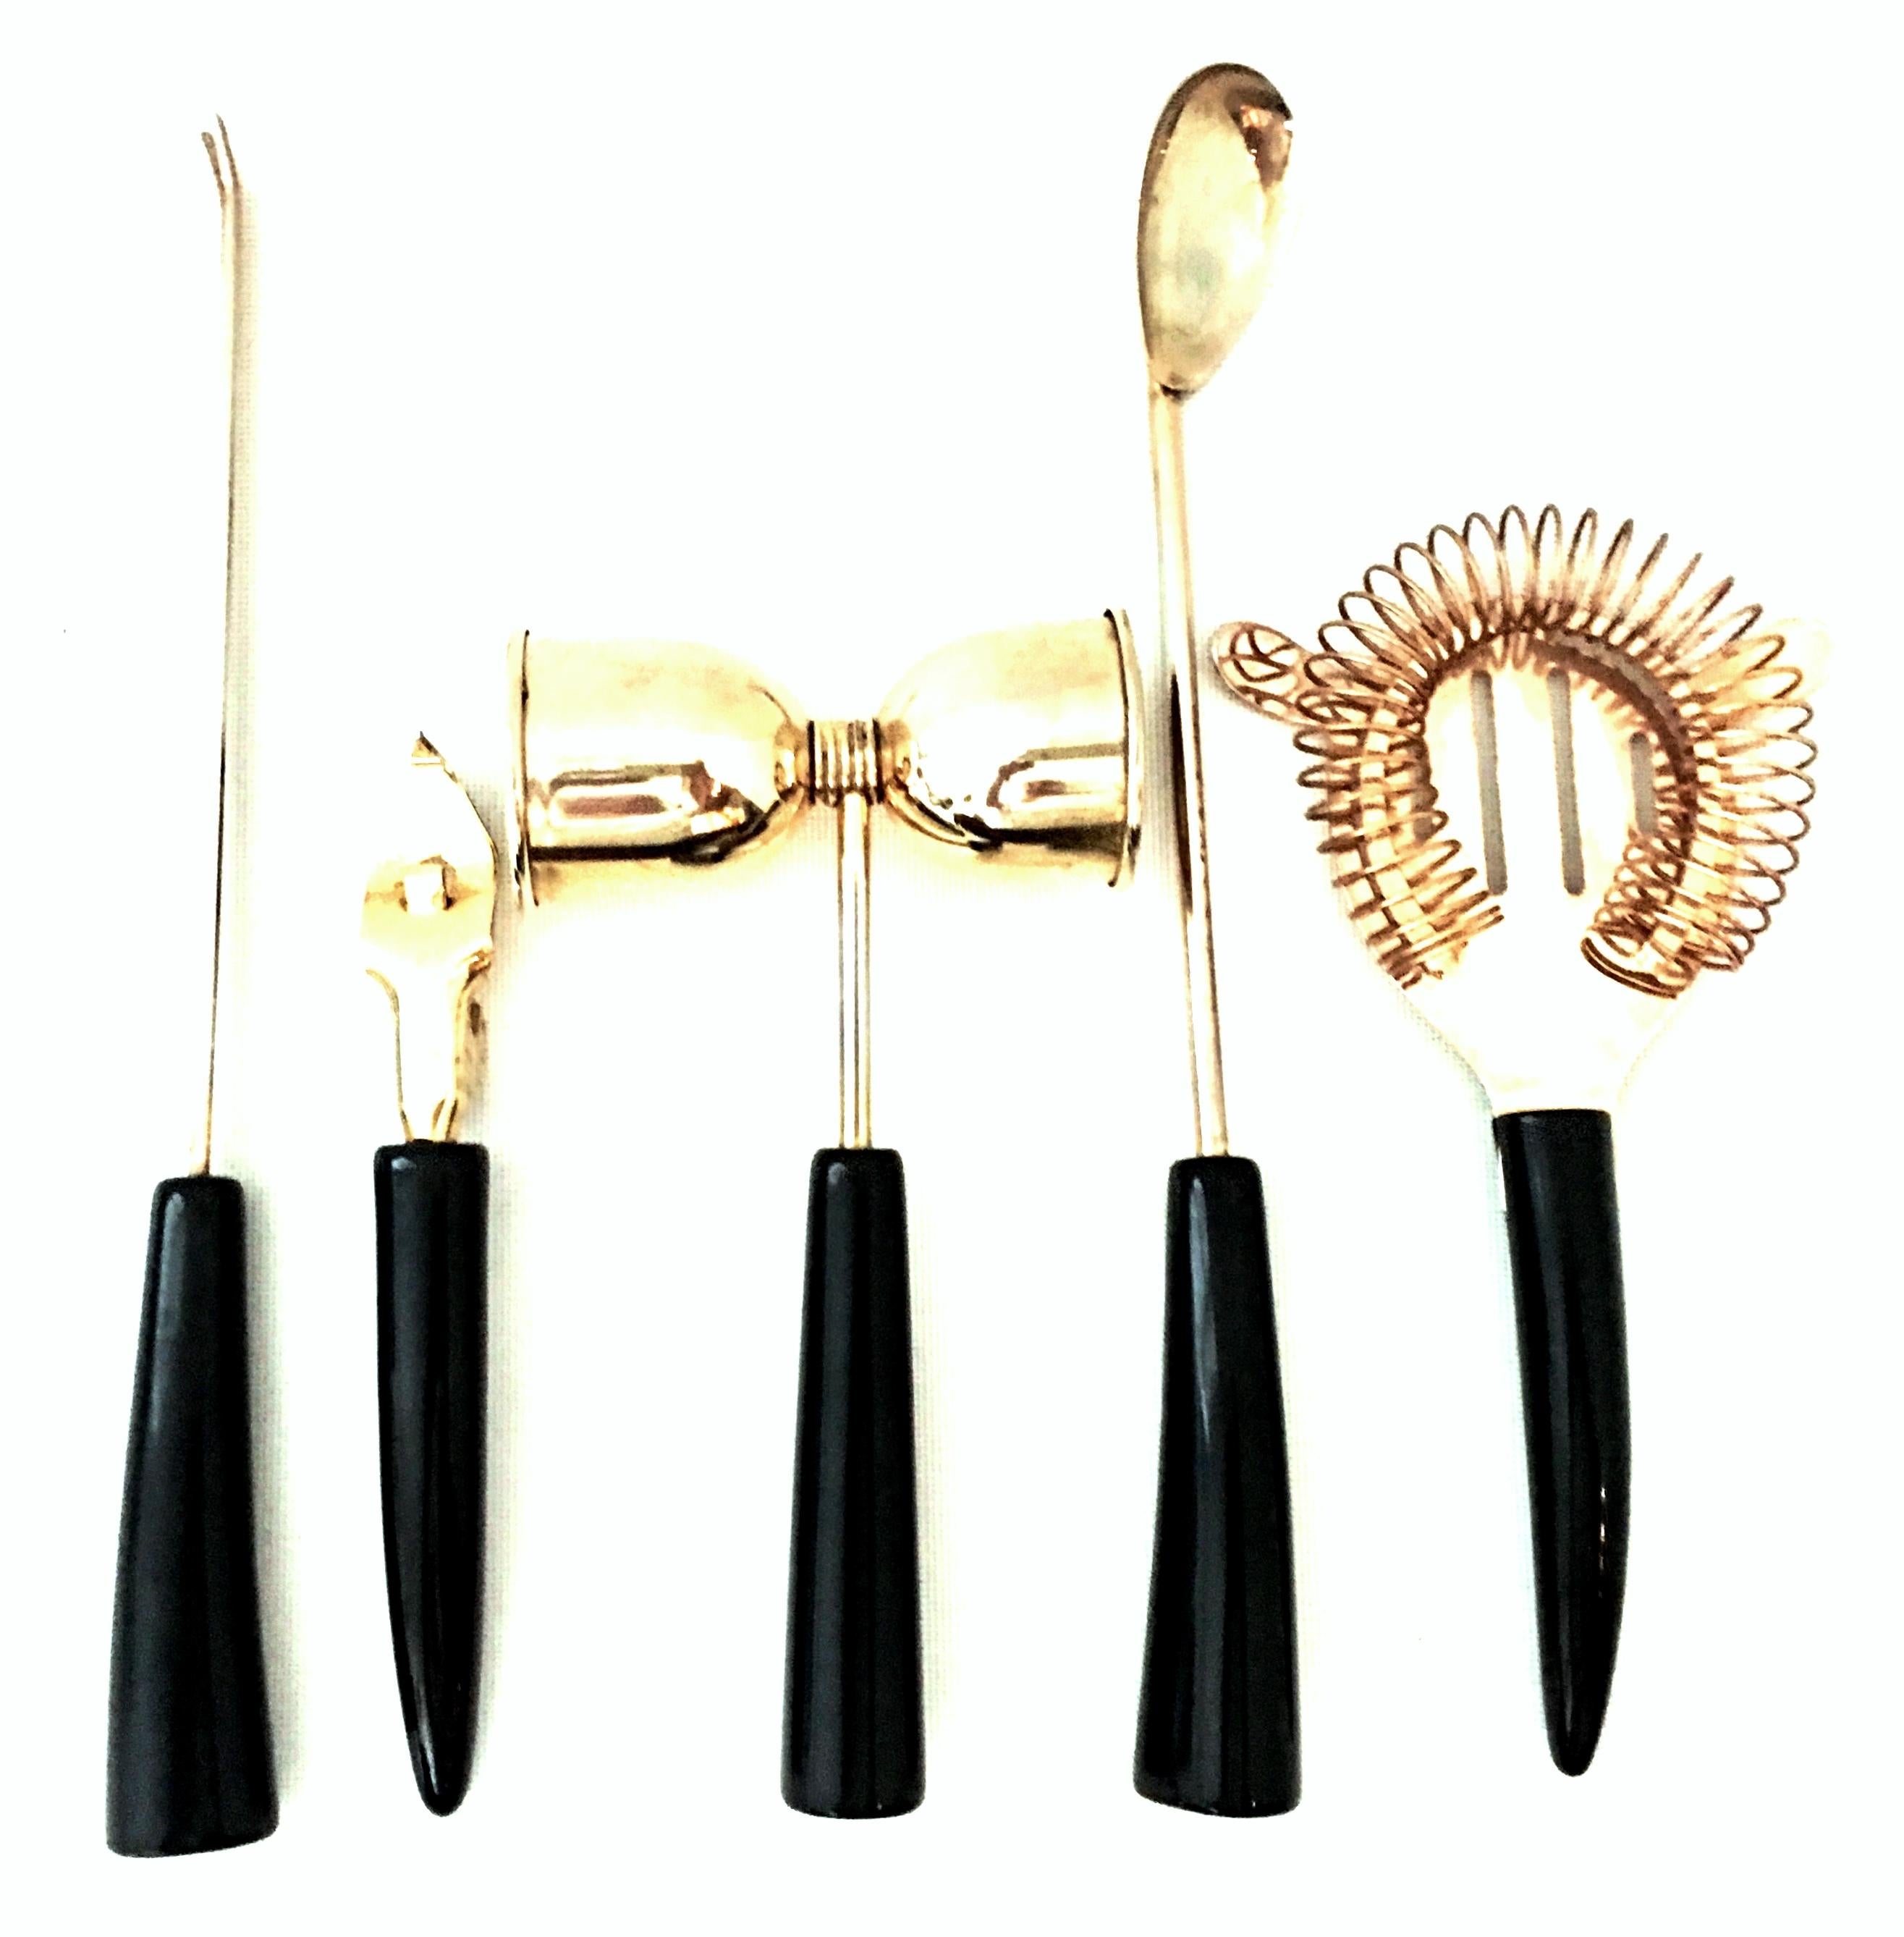 Mid-20th century English 24-karat, gold plate and black Lucite handled bar tools set of 5 pieces by, Regent Sheffield. This five-piece set includes, 1 Hawthorne strainer, 1 bar spoon, 1 bar fork, 1 bottle opener and 1 double bell shaped handled